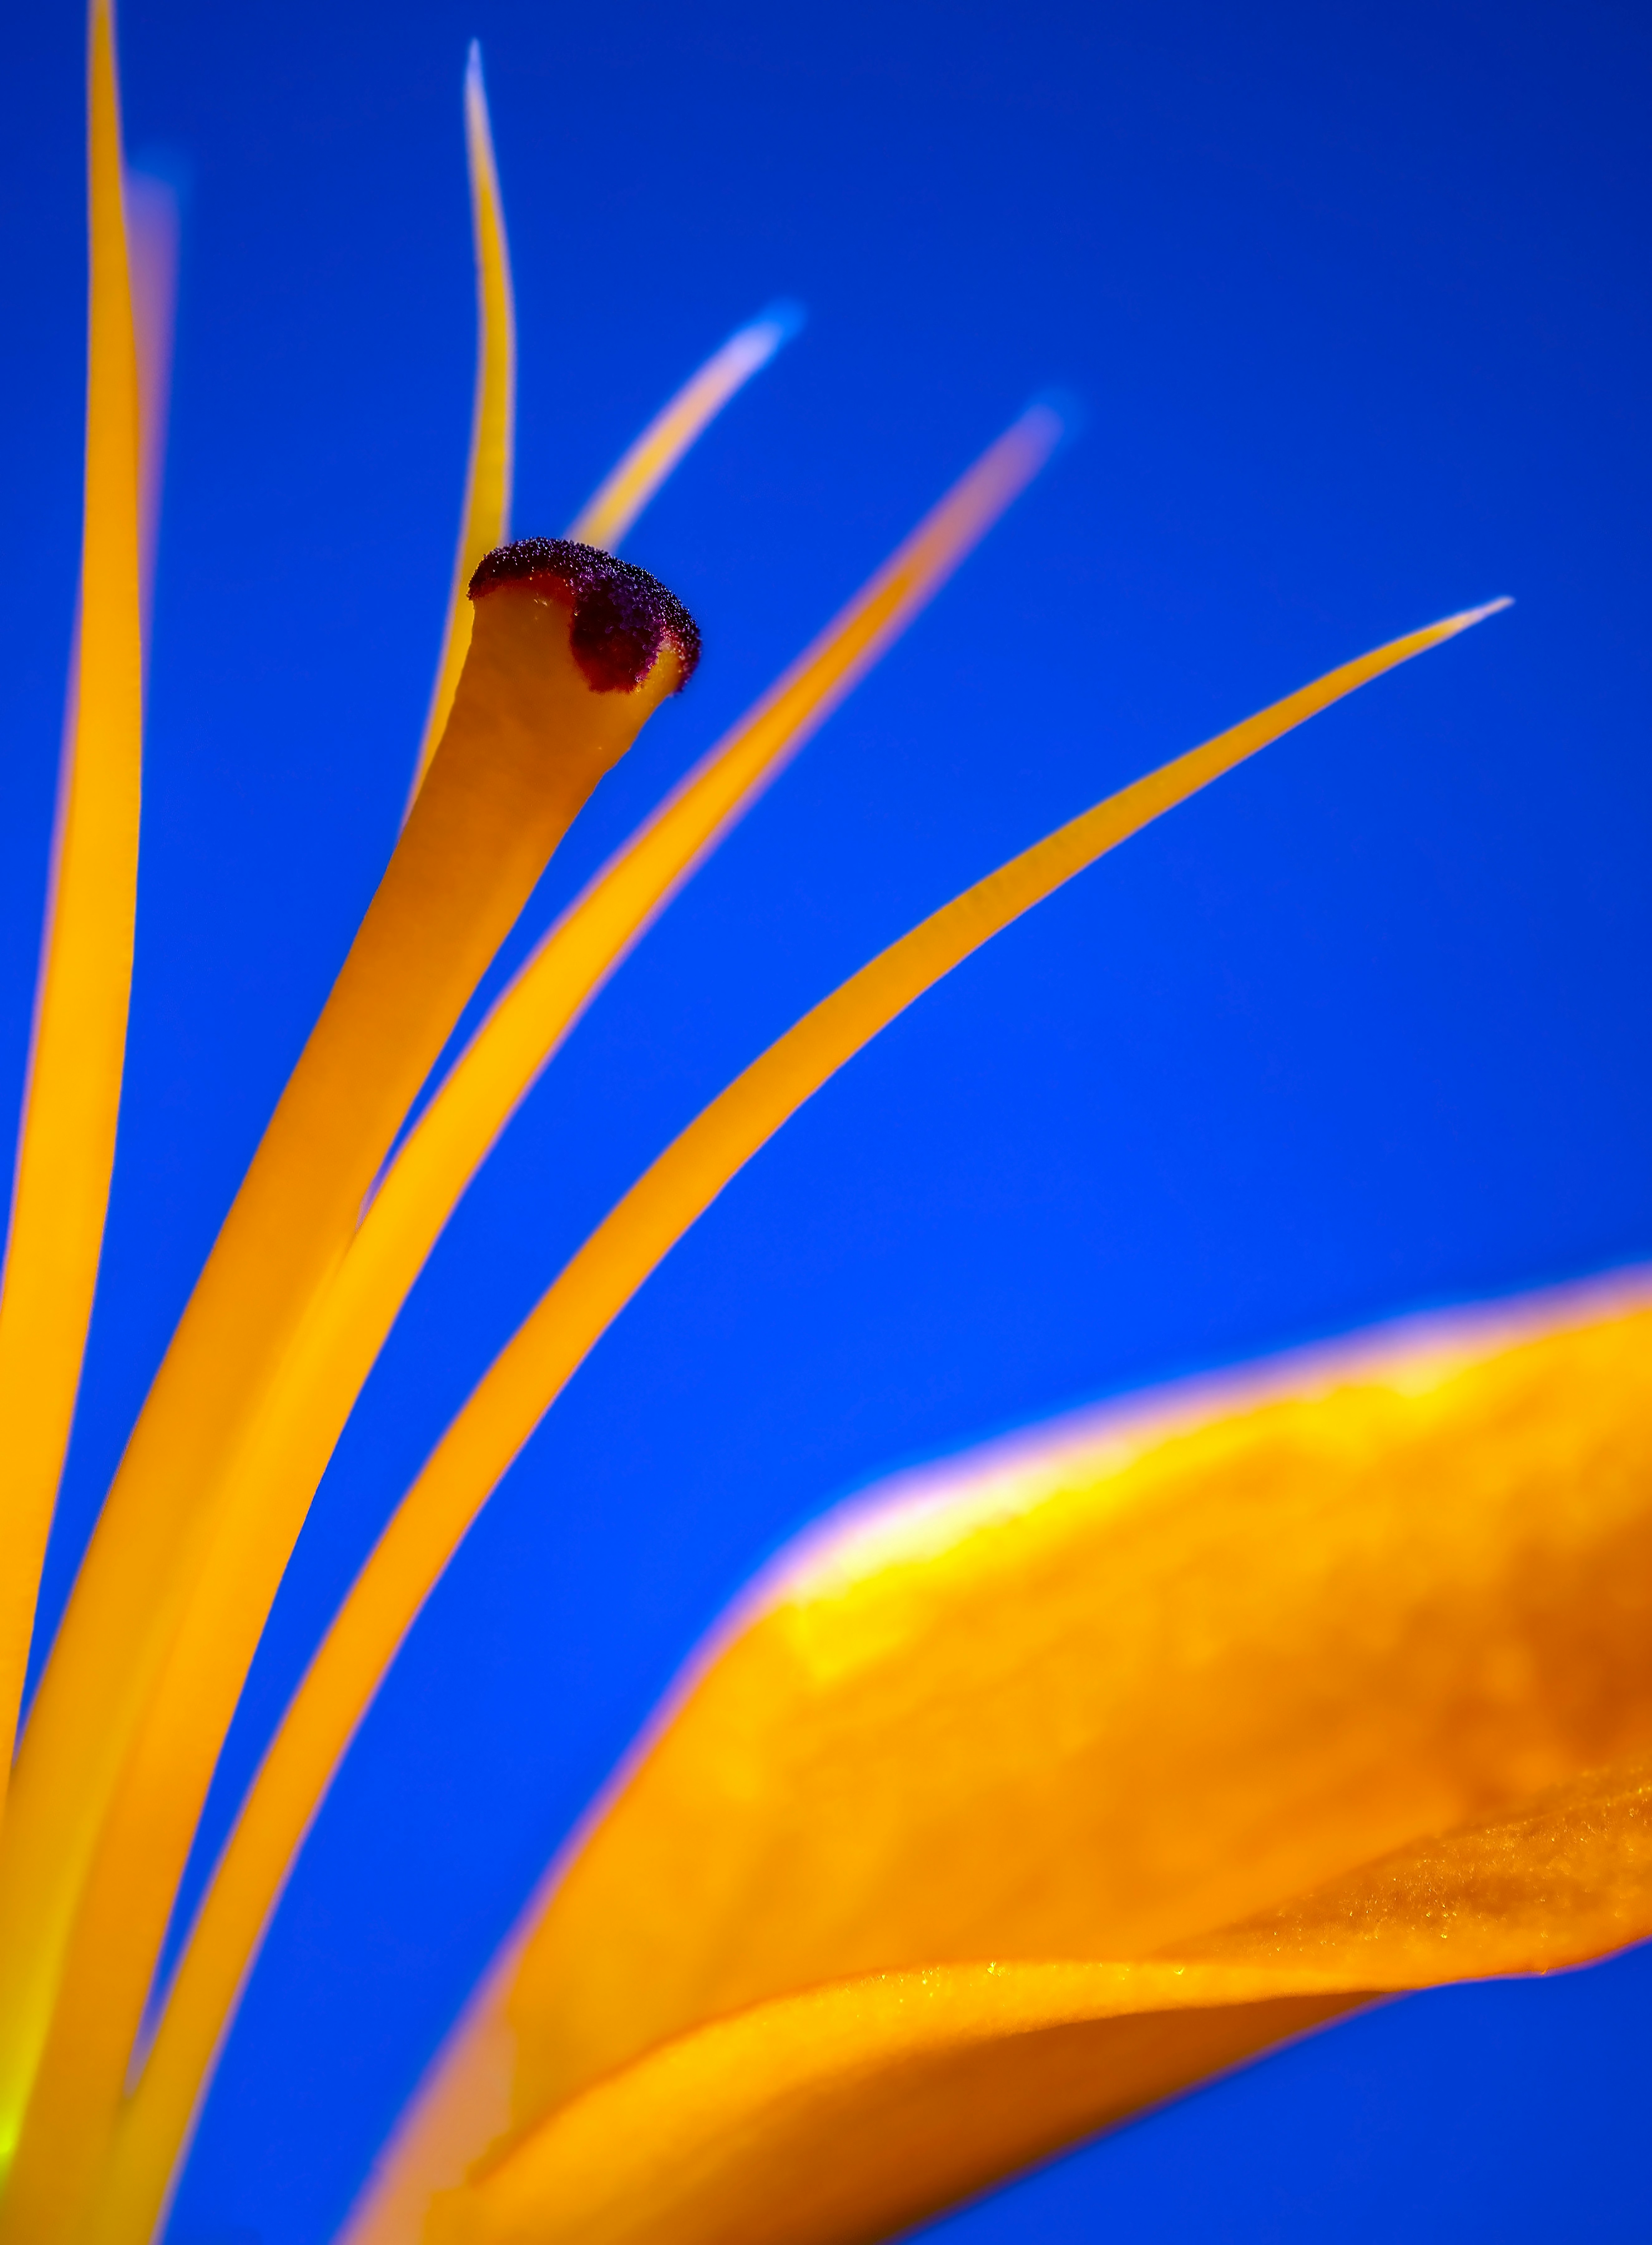 yellow flower in close up photography